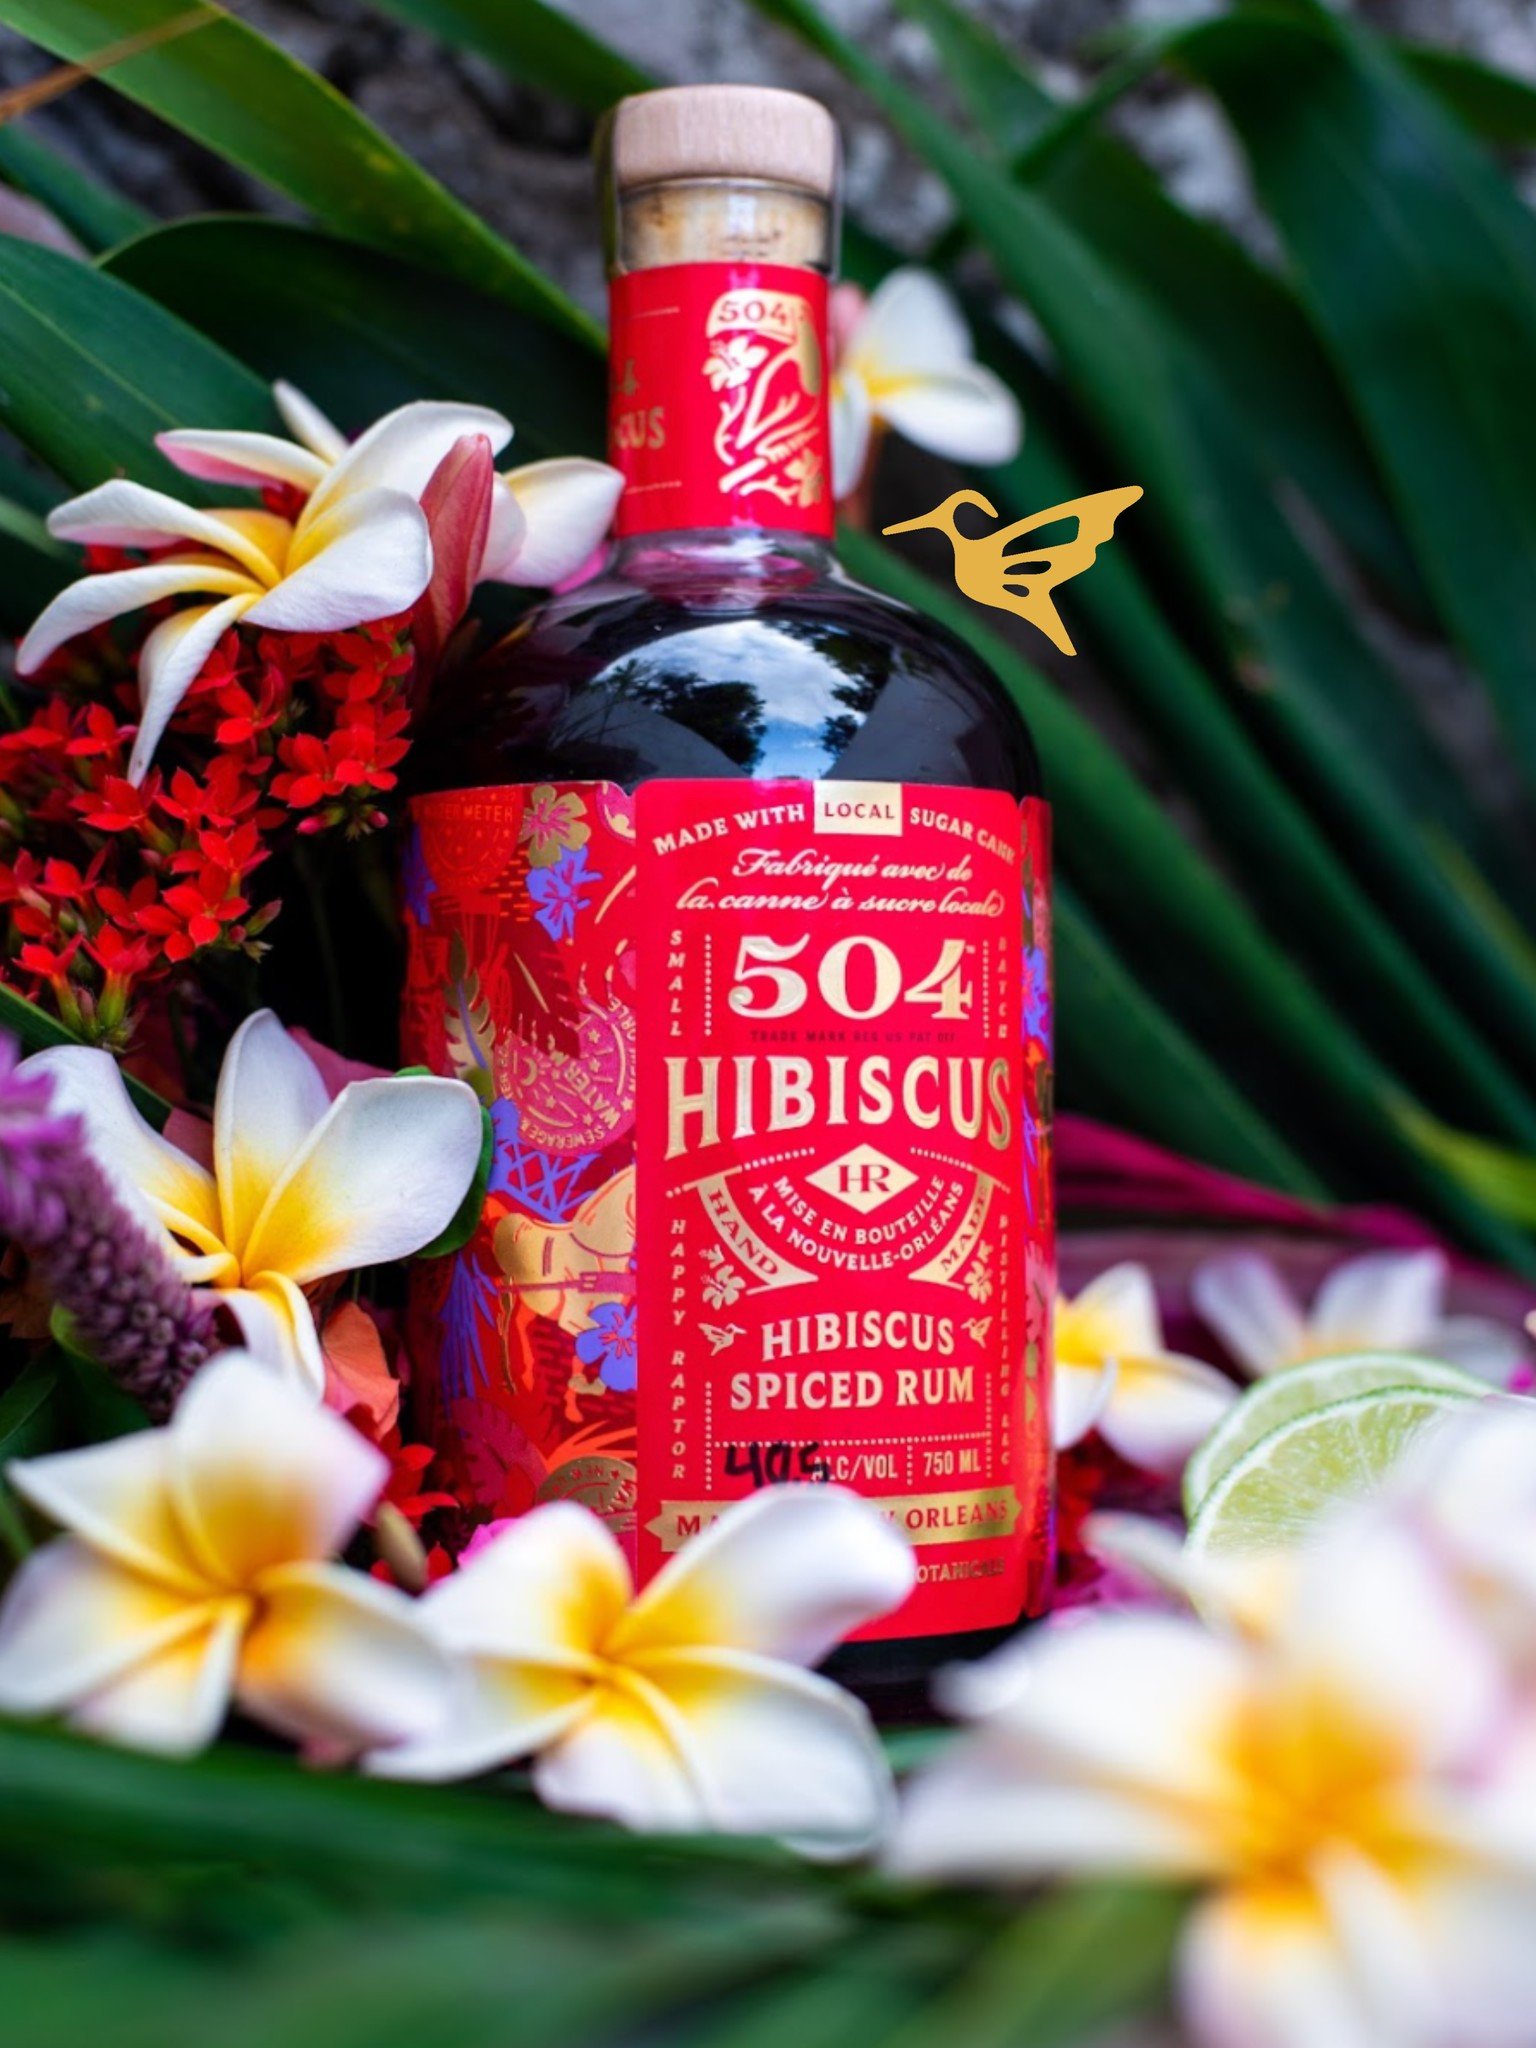 Since it's our last week in business, we'll tell you a secret. We've sold thousands of 504Hibiscus Lemonades, and given away just as many in nonprofit event donations. ⚜️ This cocktail is the simplest one we make - just mix 1 bottle of 504Hibiscus wi